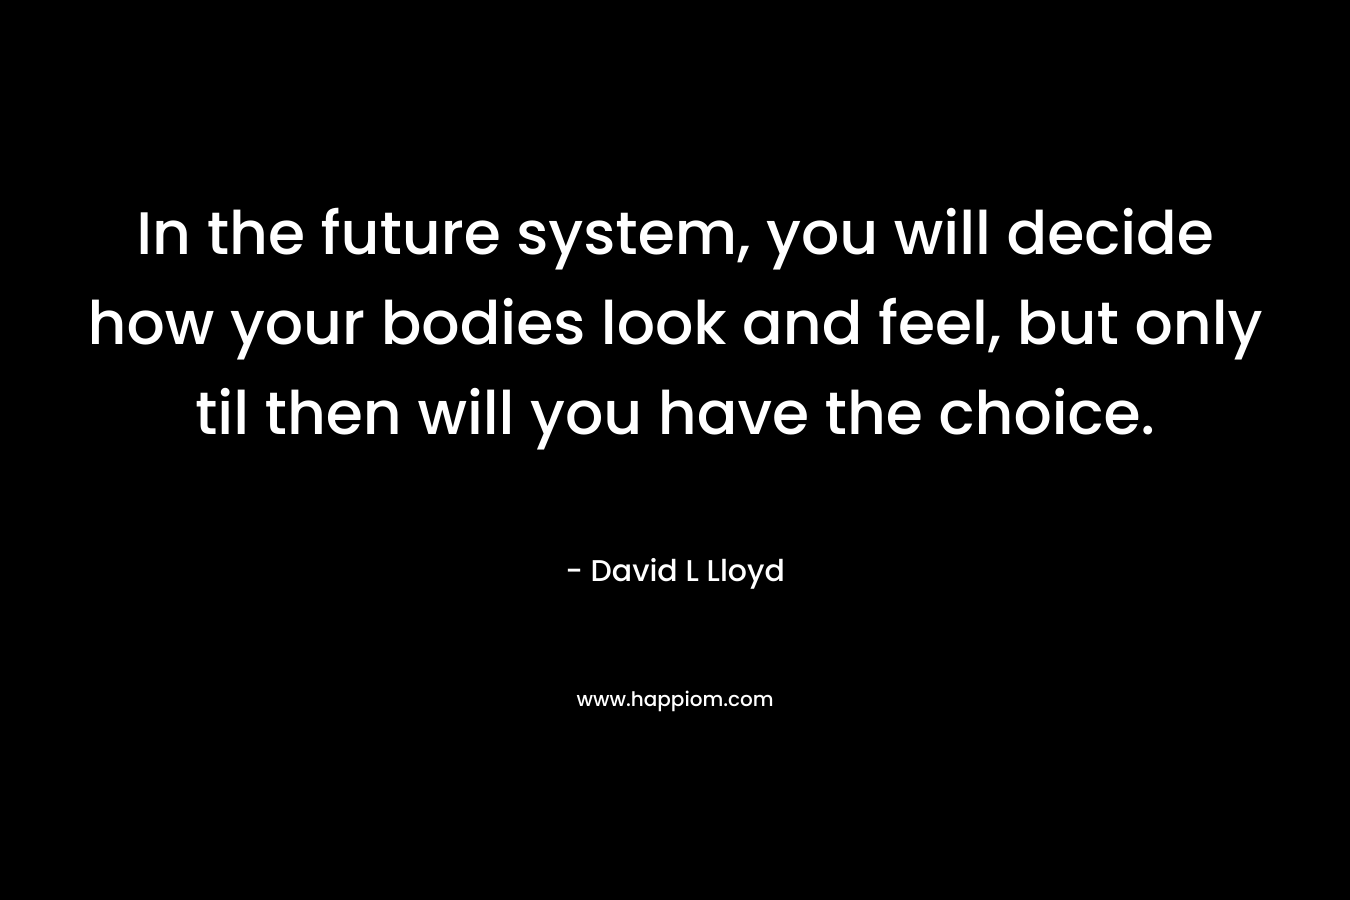 In the future system, you will decide how your bodies look and feel, but only til then will you have the choice.